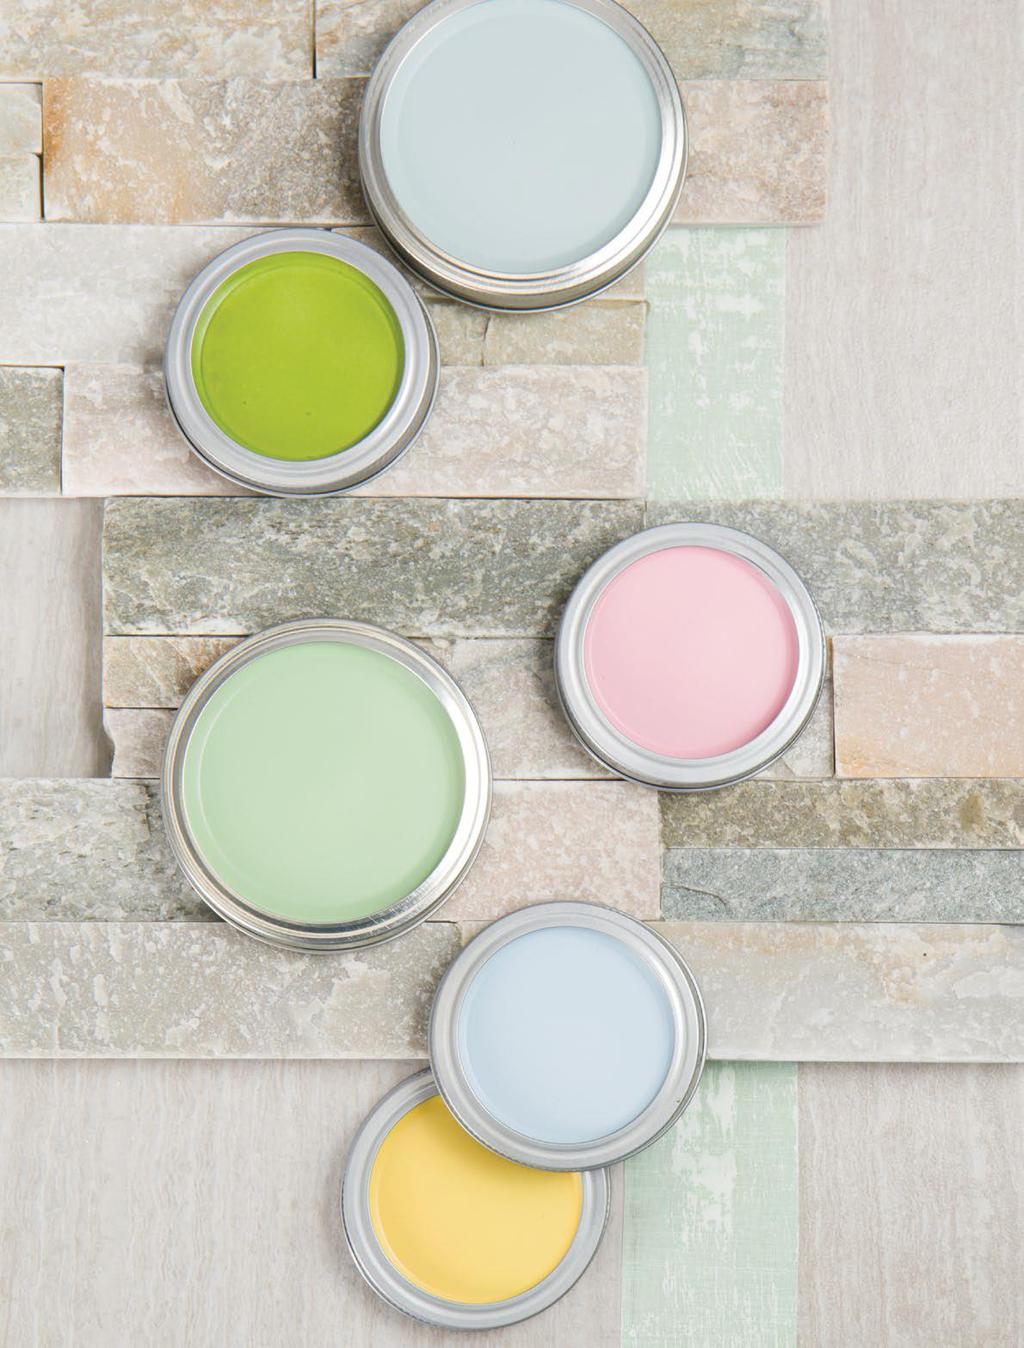 Pearl Lane Design Master Colors Mist 555 Chartreuse 534 Perfect Pink 780 Prairie Grass 752 Blue Sky